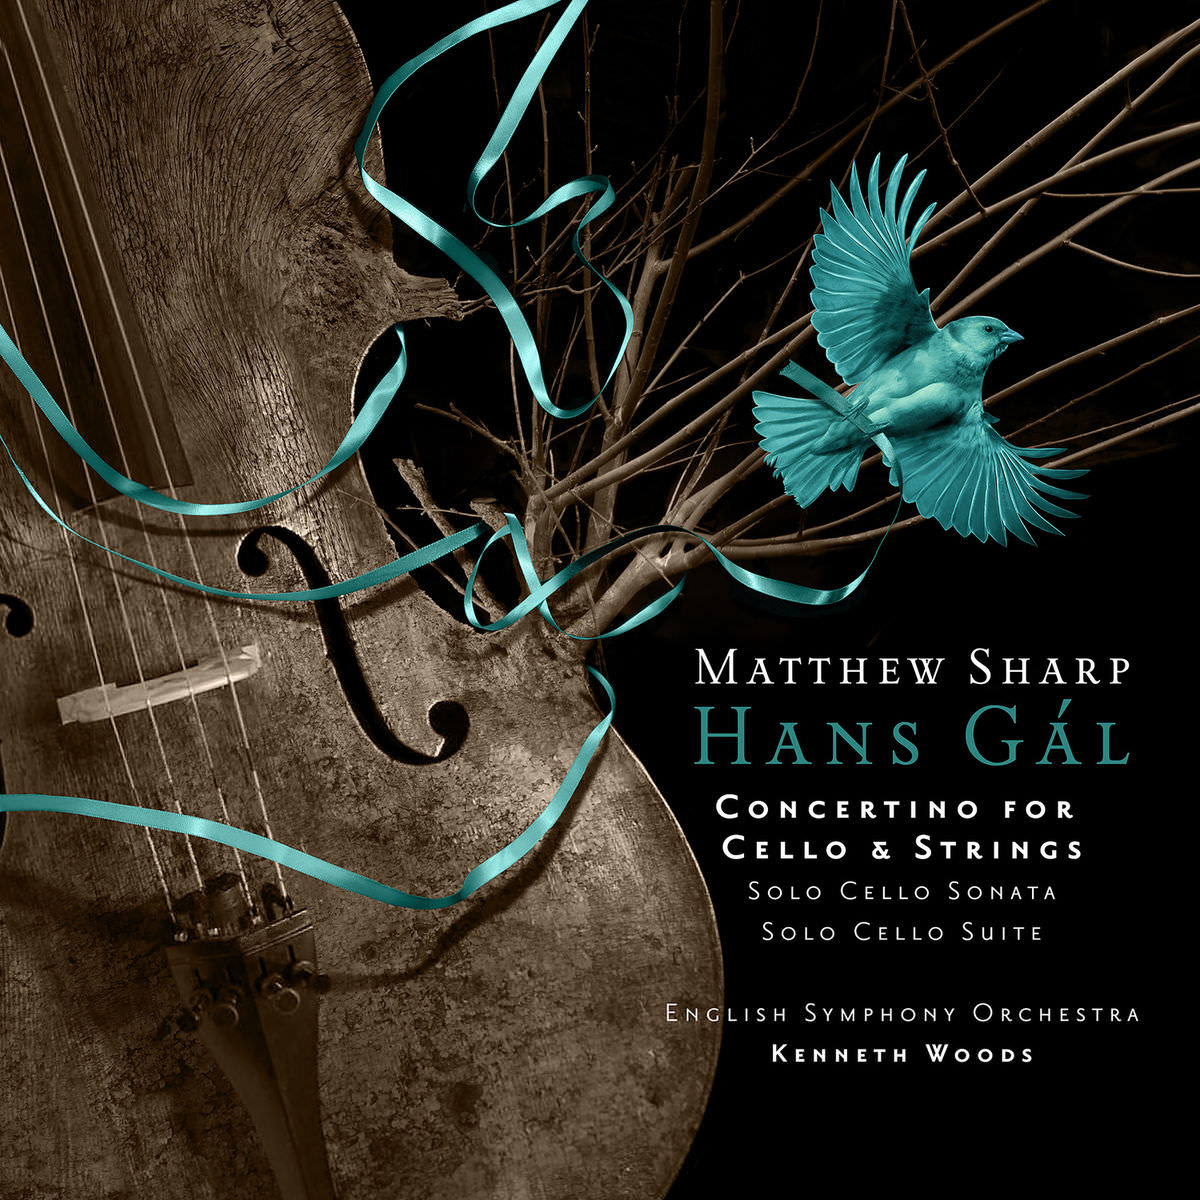 Matthew Sharp, English Symphony Orchestra & Kenneth Woods – Hans Gal: Concertino for Cello and Strings (2018) [FLAC 24bit/88,2kHz]